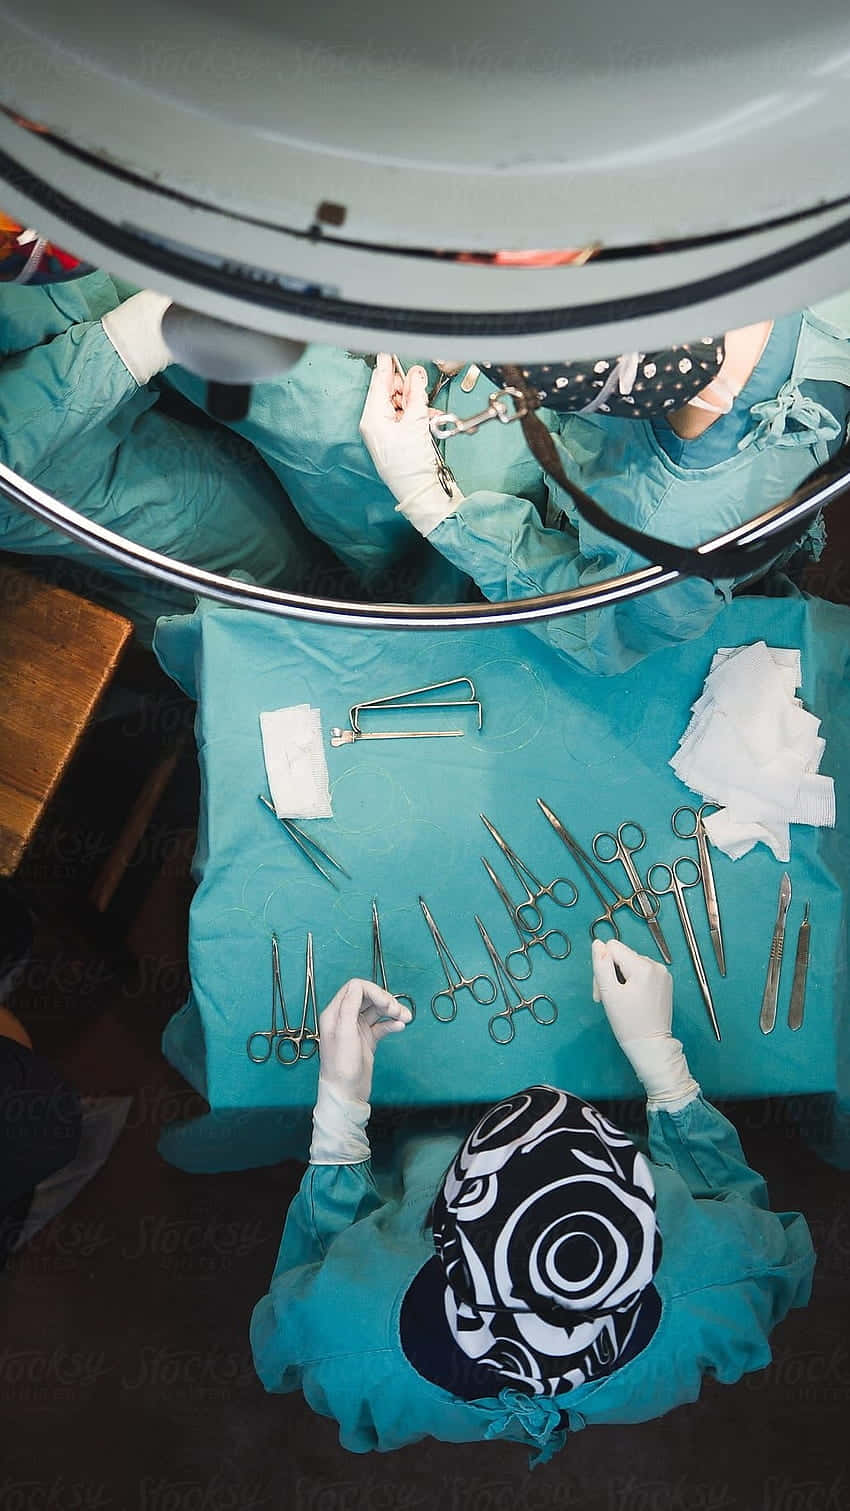 Surgical_ Team_at_ Work Wallpaper